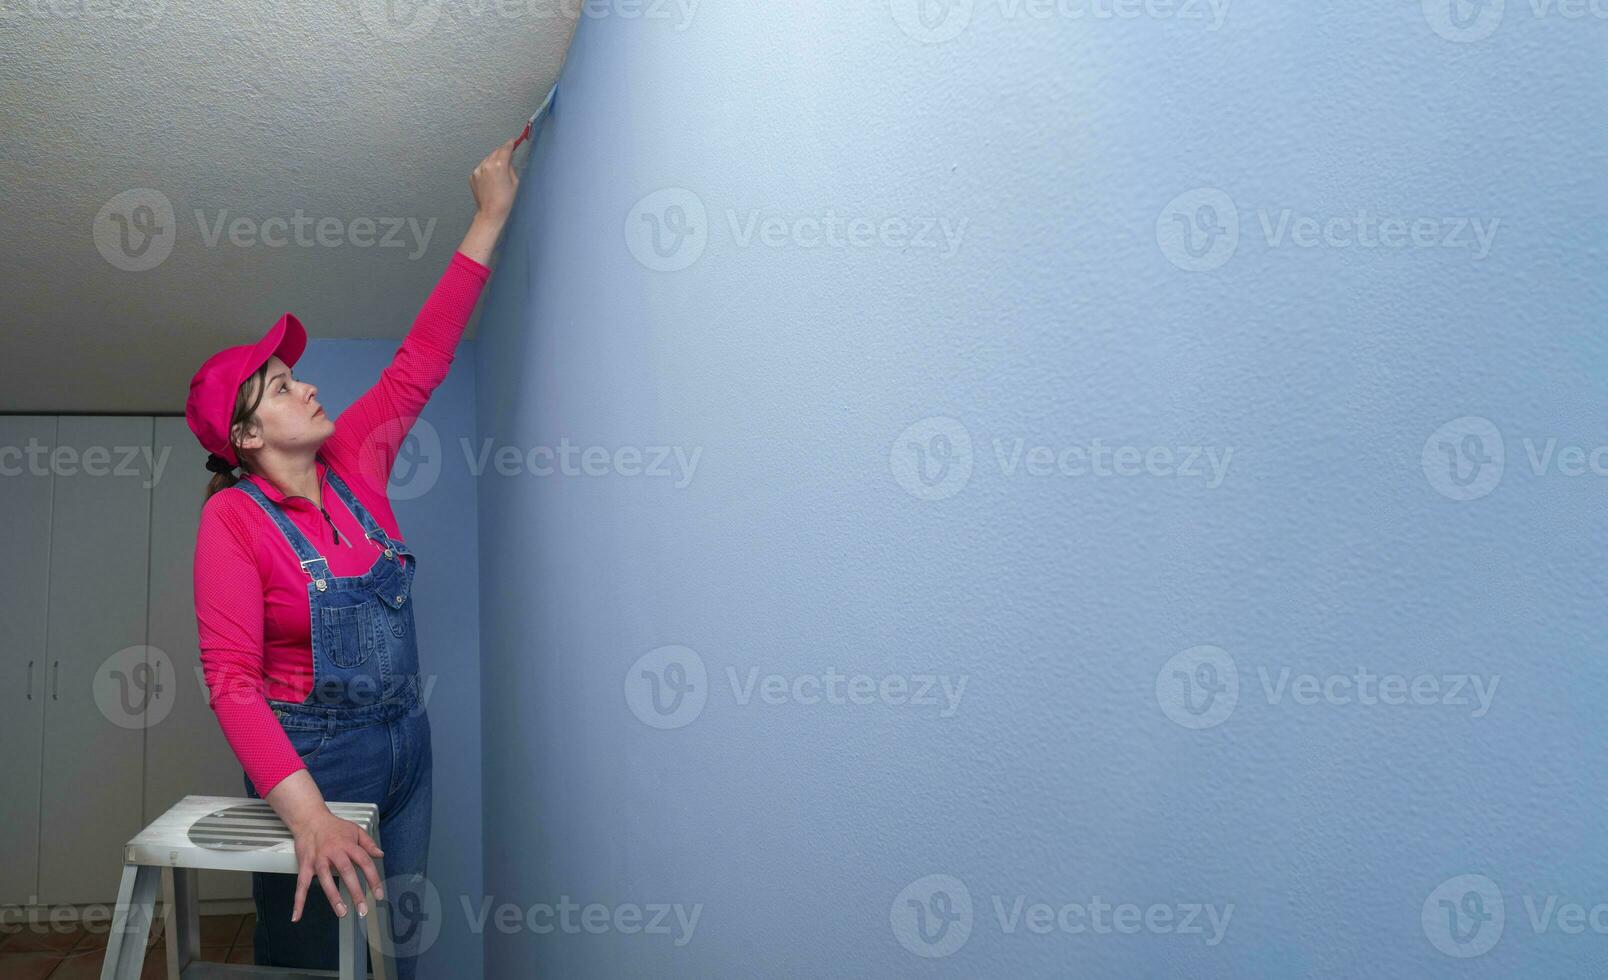 woman dressed in overalls and a red t-shirt on a metal ladder, with a brush in her hand finishing painting a blue wall in an empty room photo